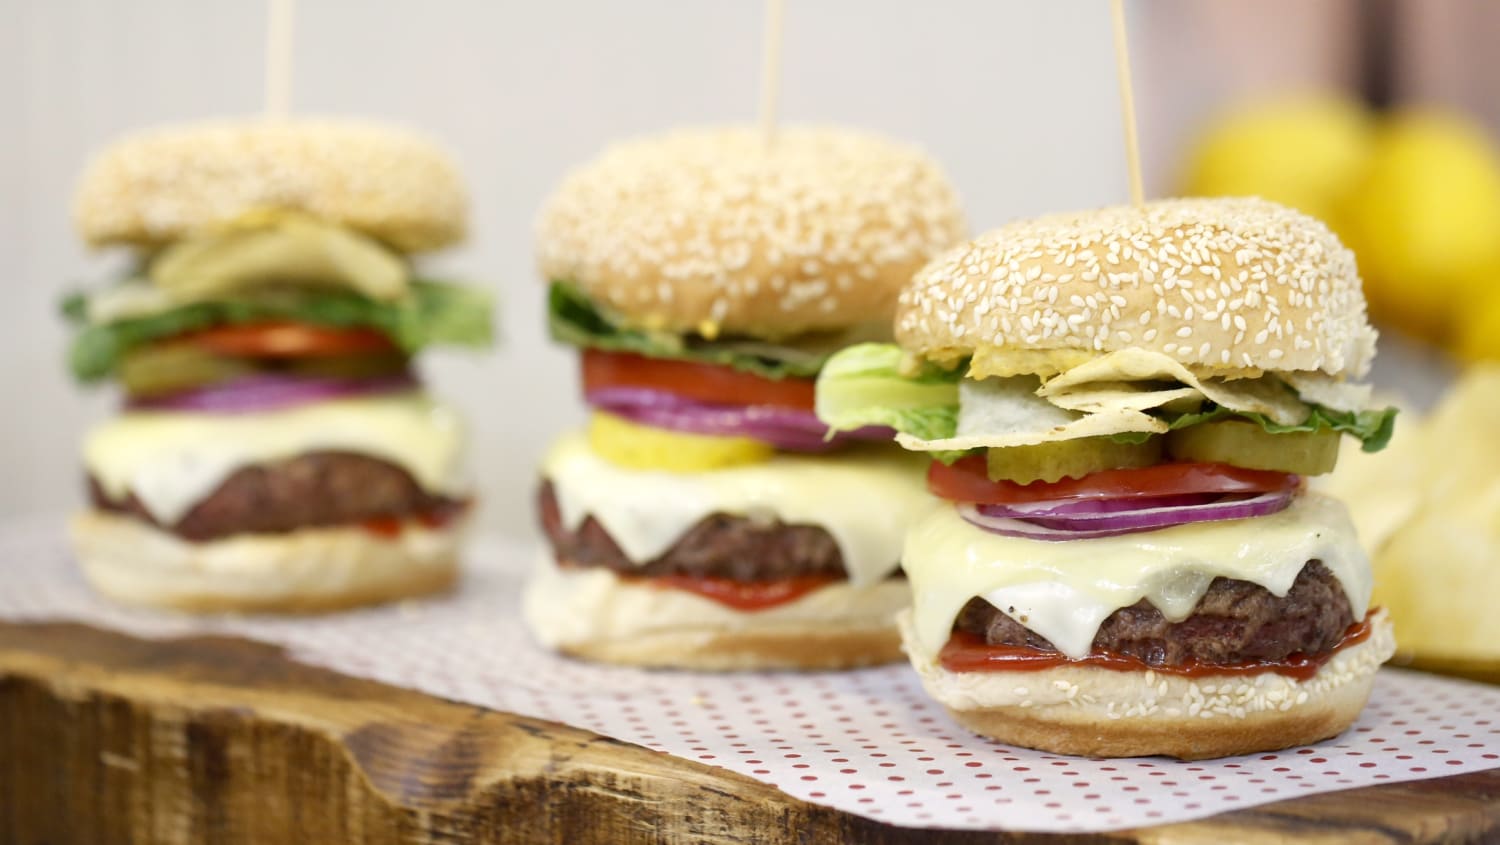 Why you should eat your burger upside down says this world-famous